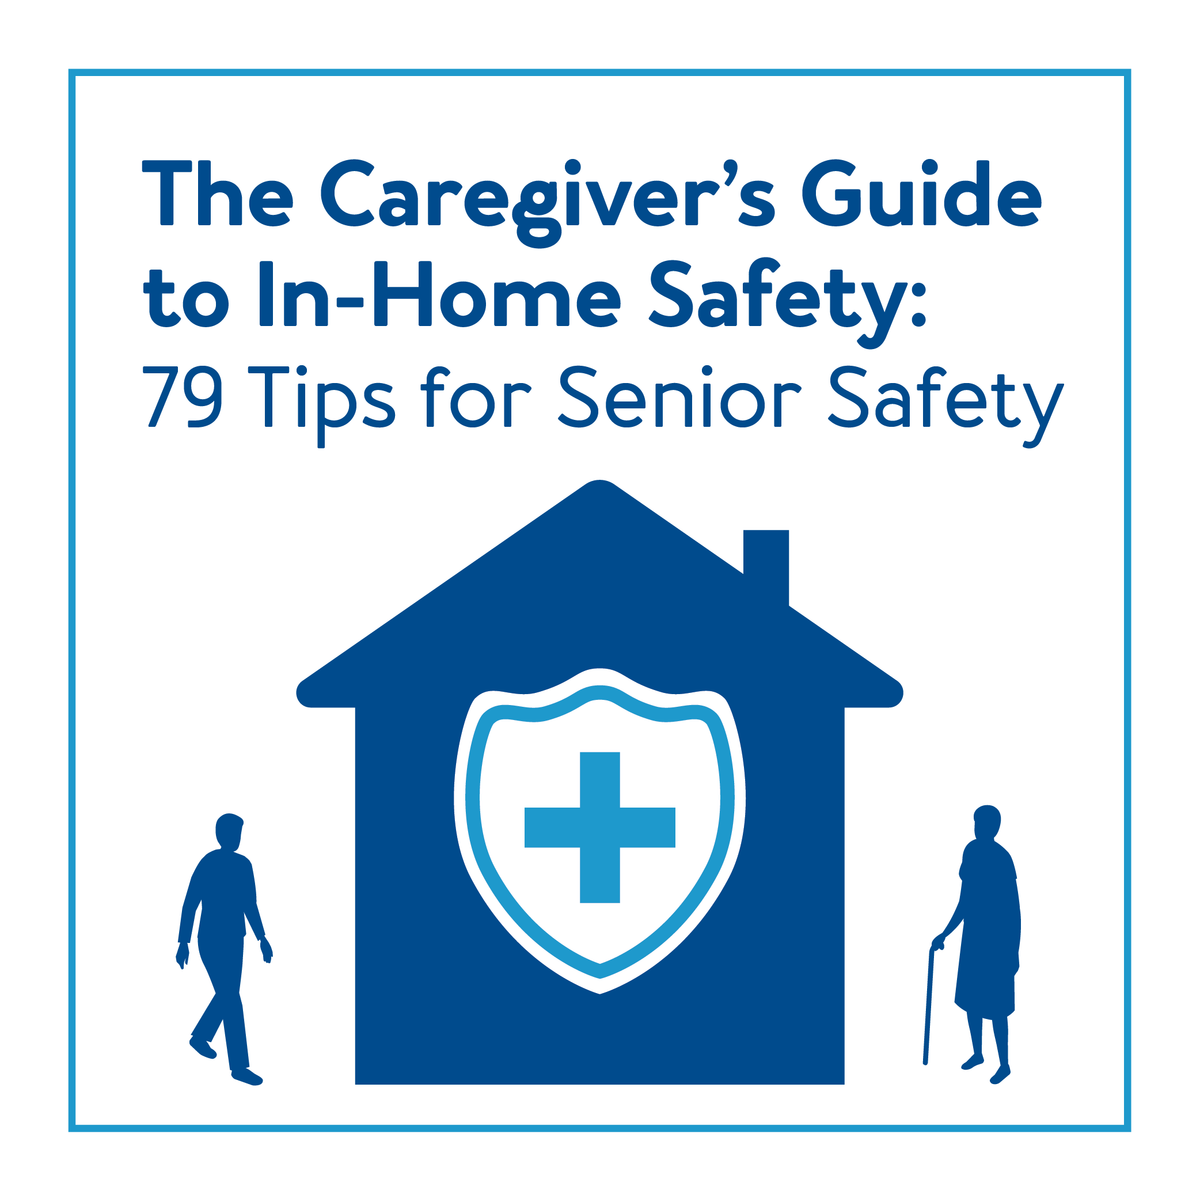 Home graphic with two outlines of people, text: The Caregiver’s Guide to In-Home Safety: 79 Tips for Senior Safety